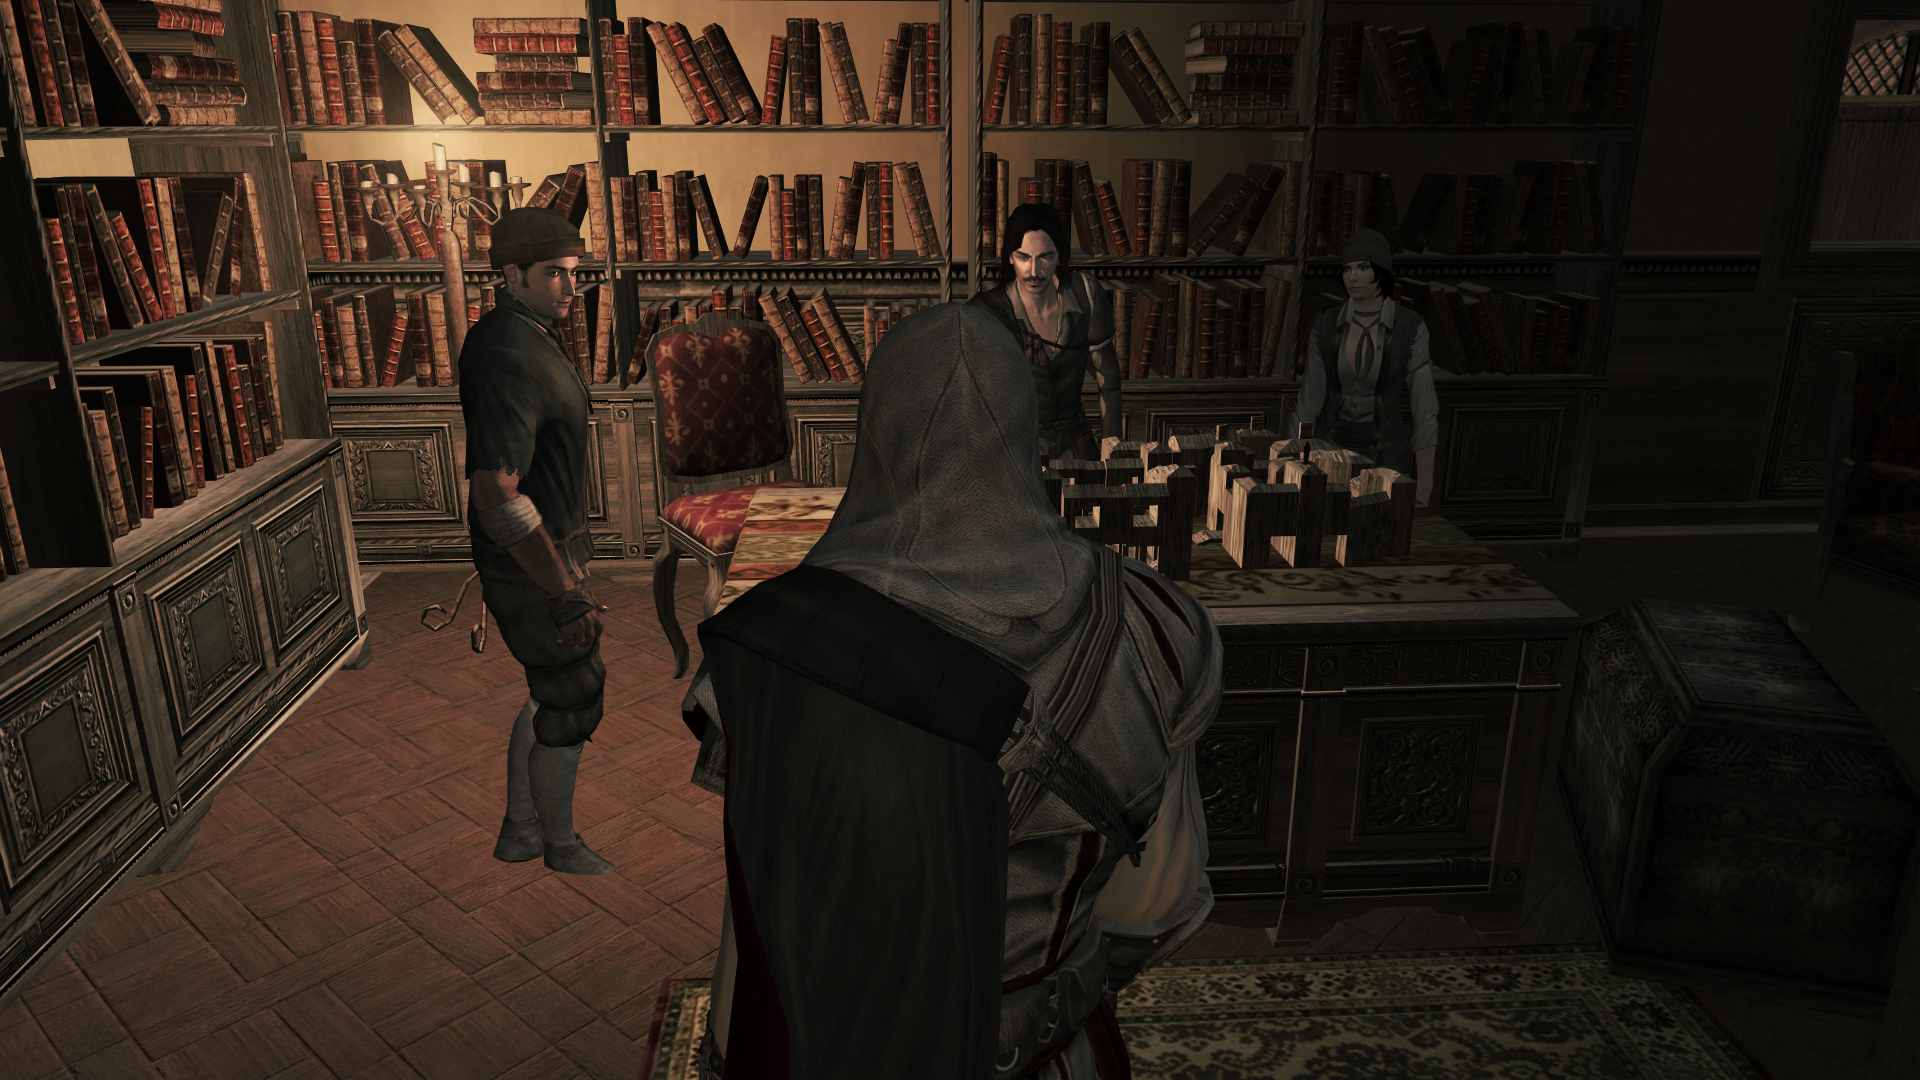 Assassin's Creed II: Discovery, Assassin's Creed Wiki